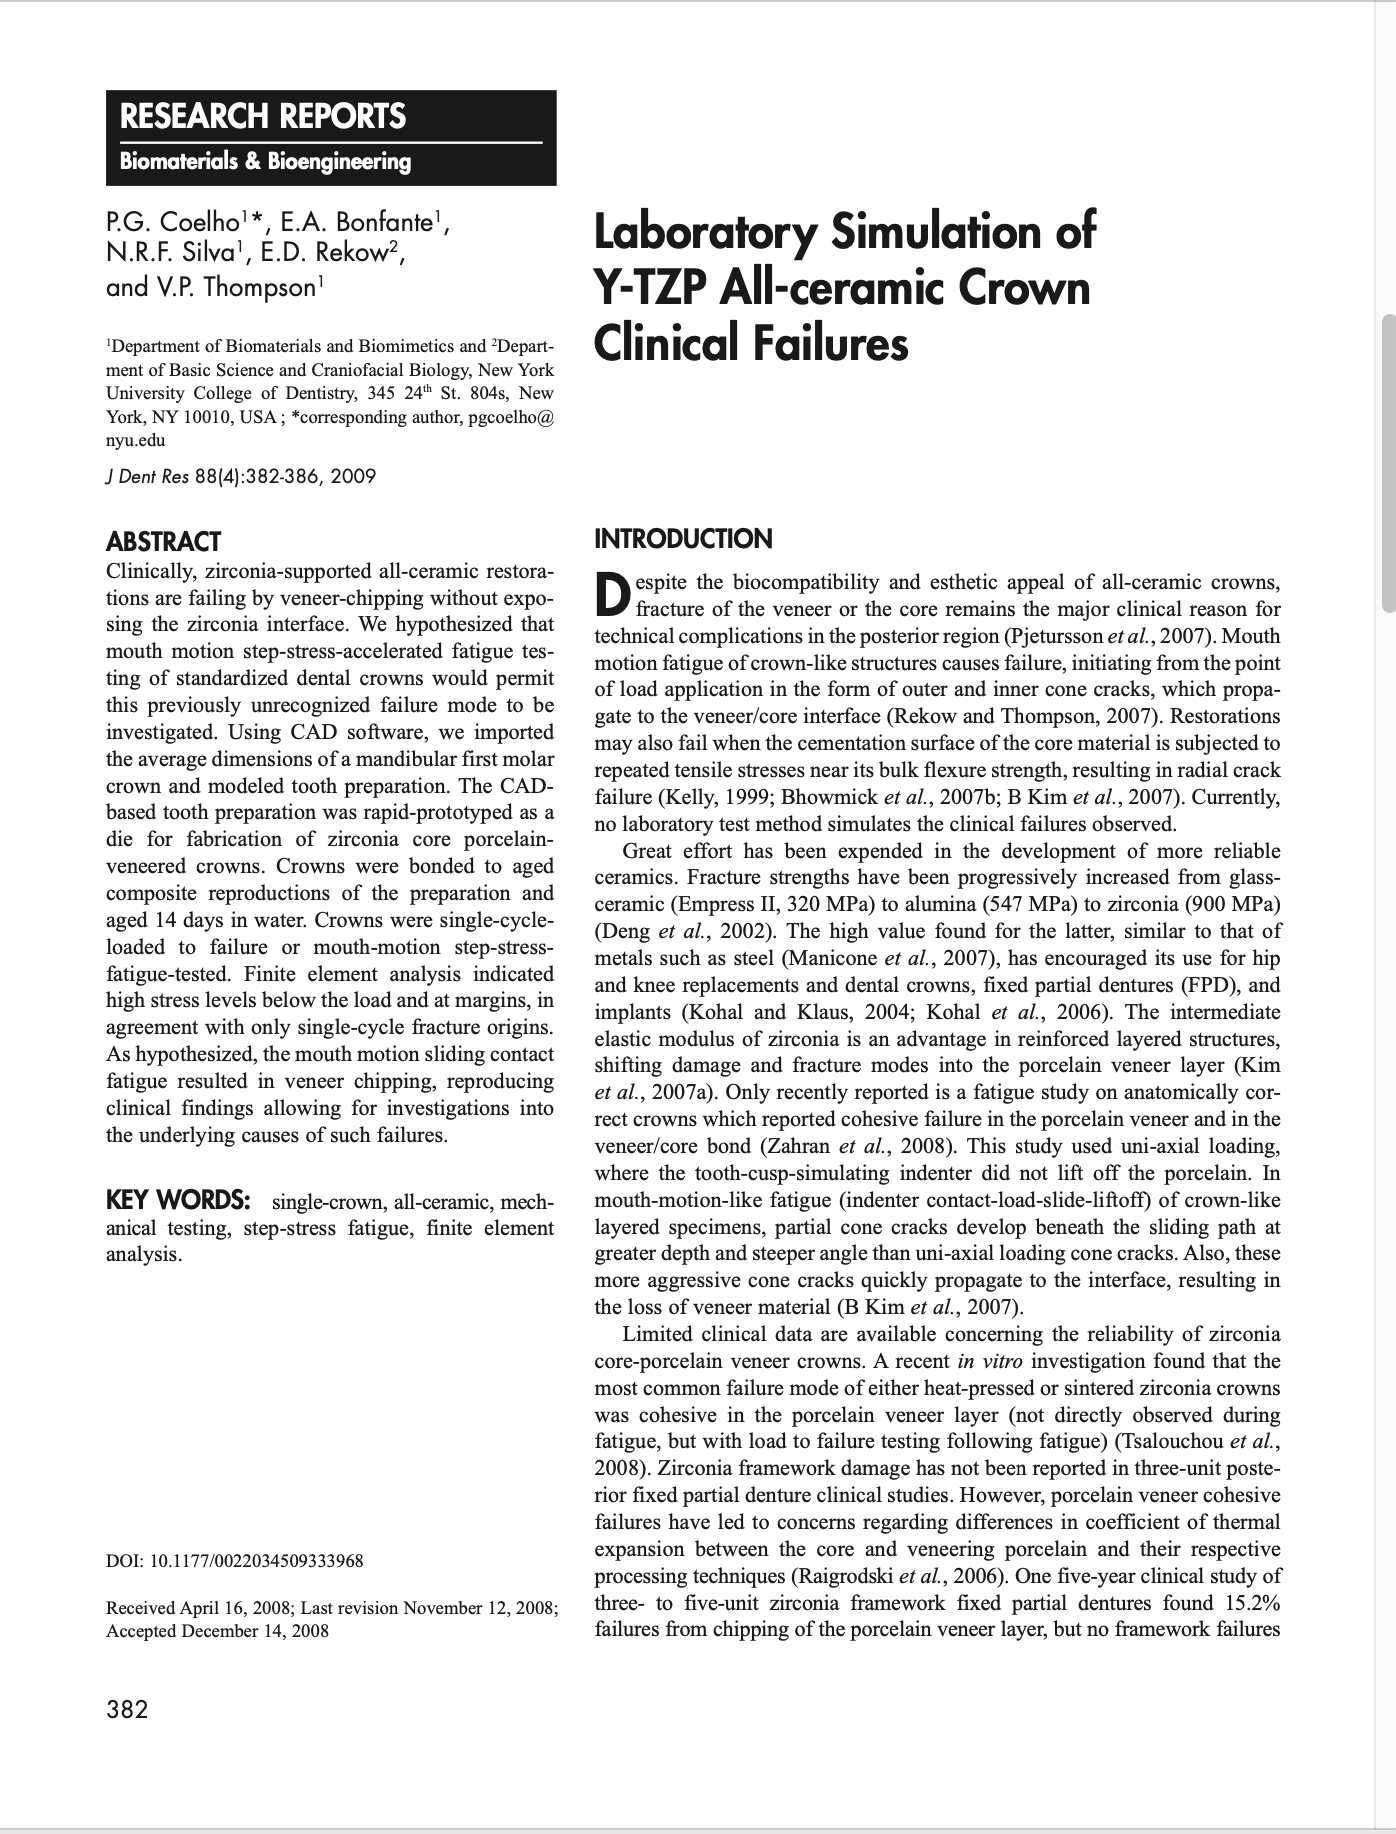 Laboratory Simulation of y-TZP All-ceramic Crown Clinical Failures